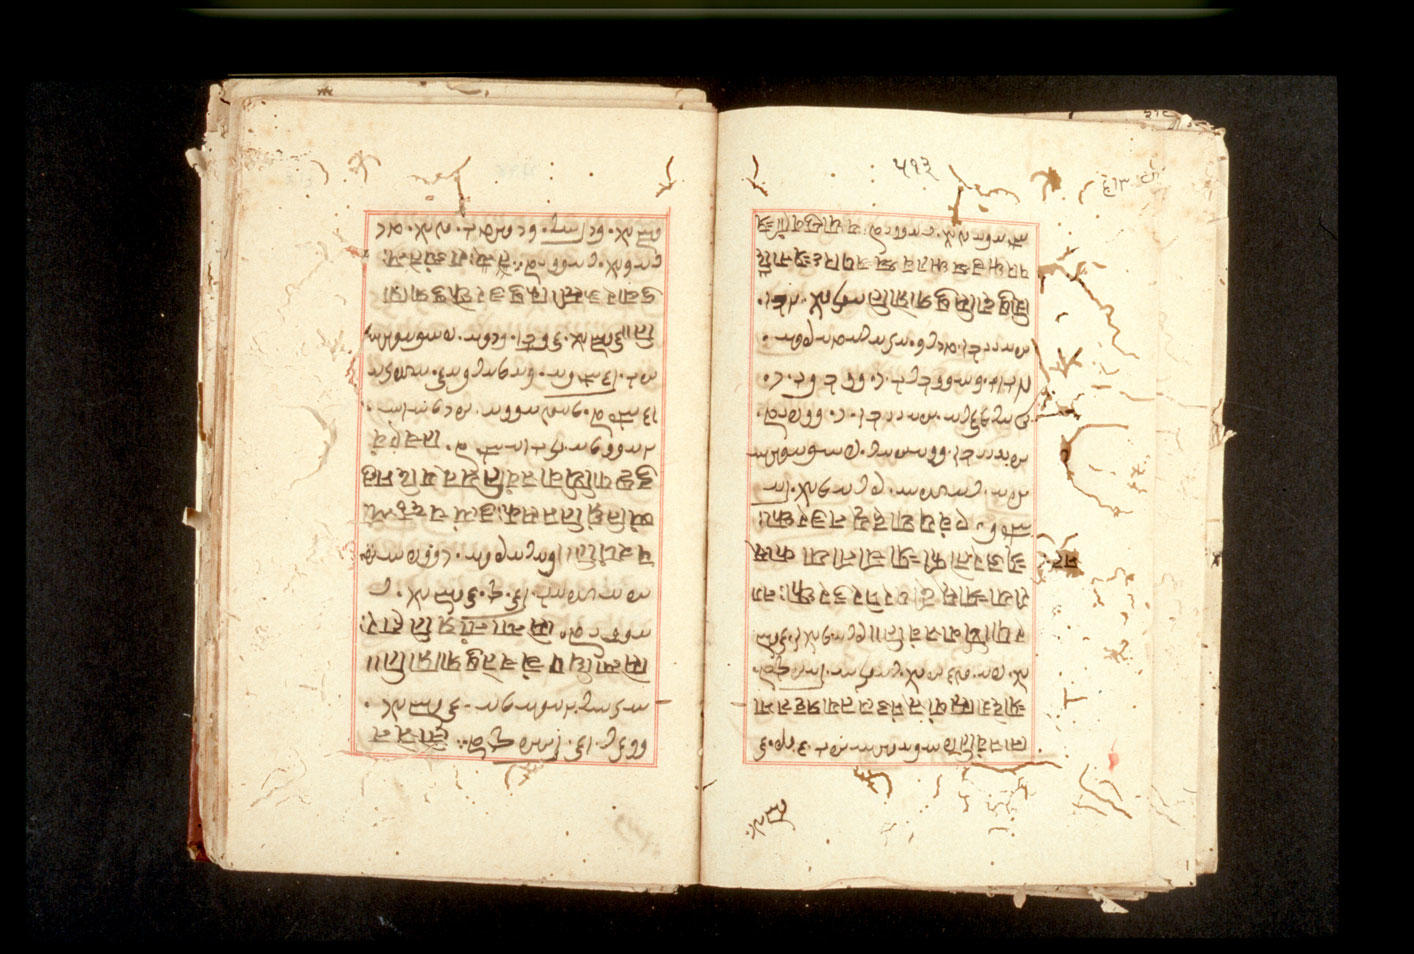 Folios 513v (right) and 514r (left)